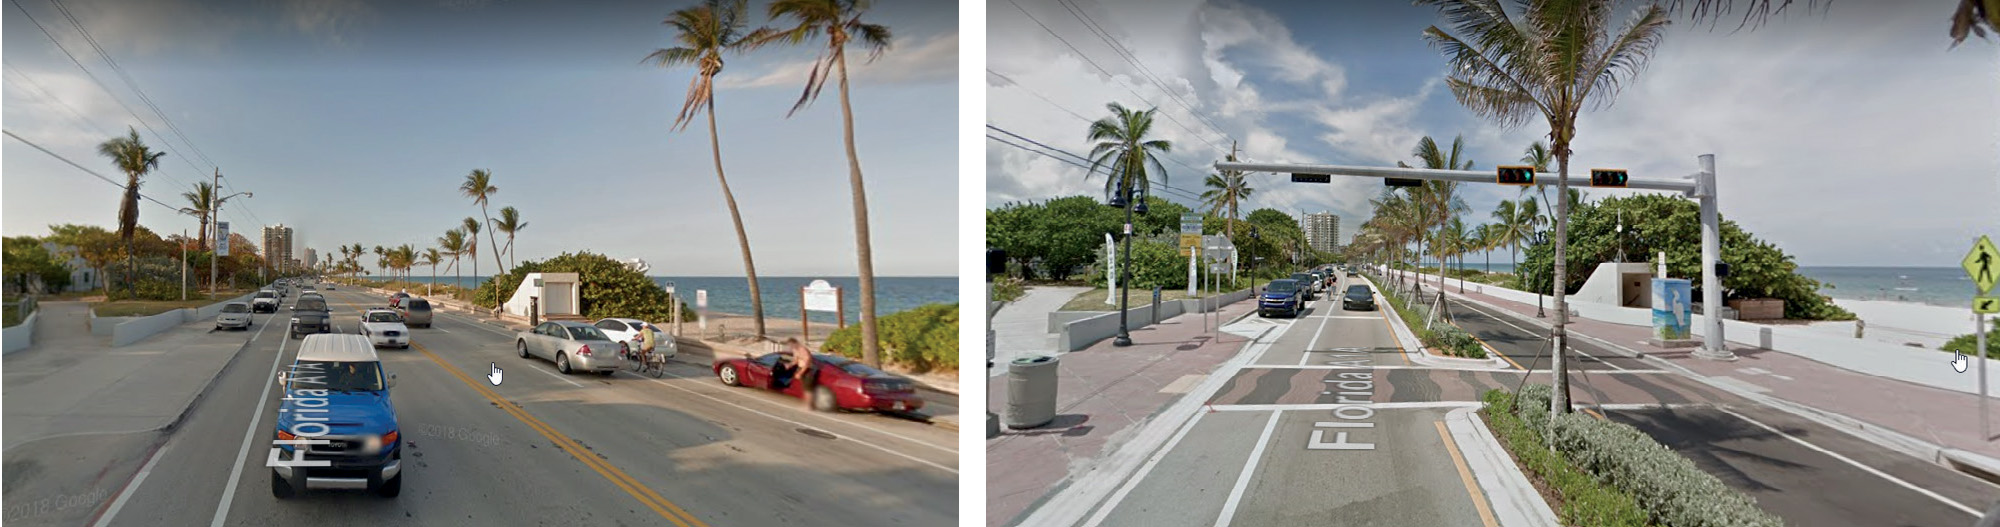 Figure 4: Before and After Route A1A Improvements, Photos Provided by FDOT